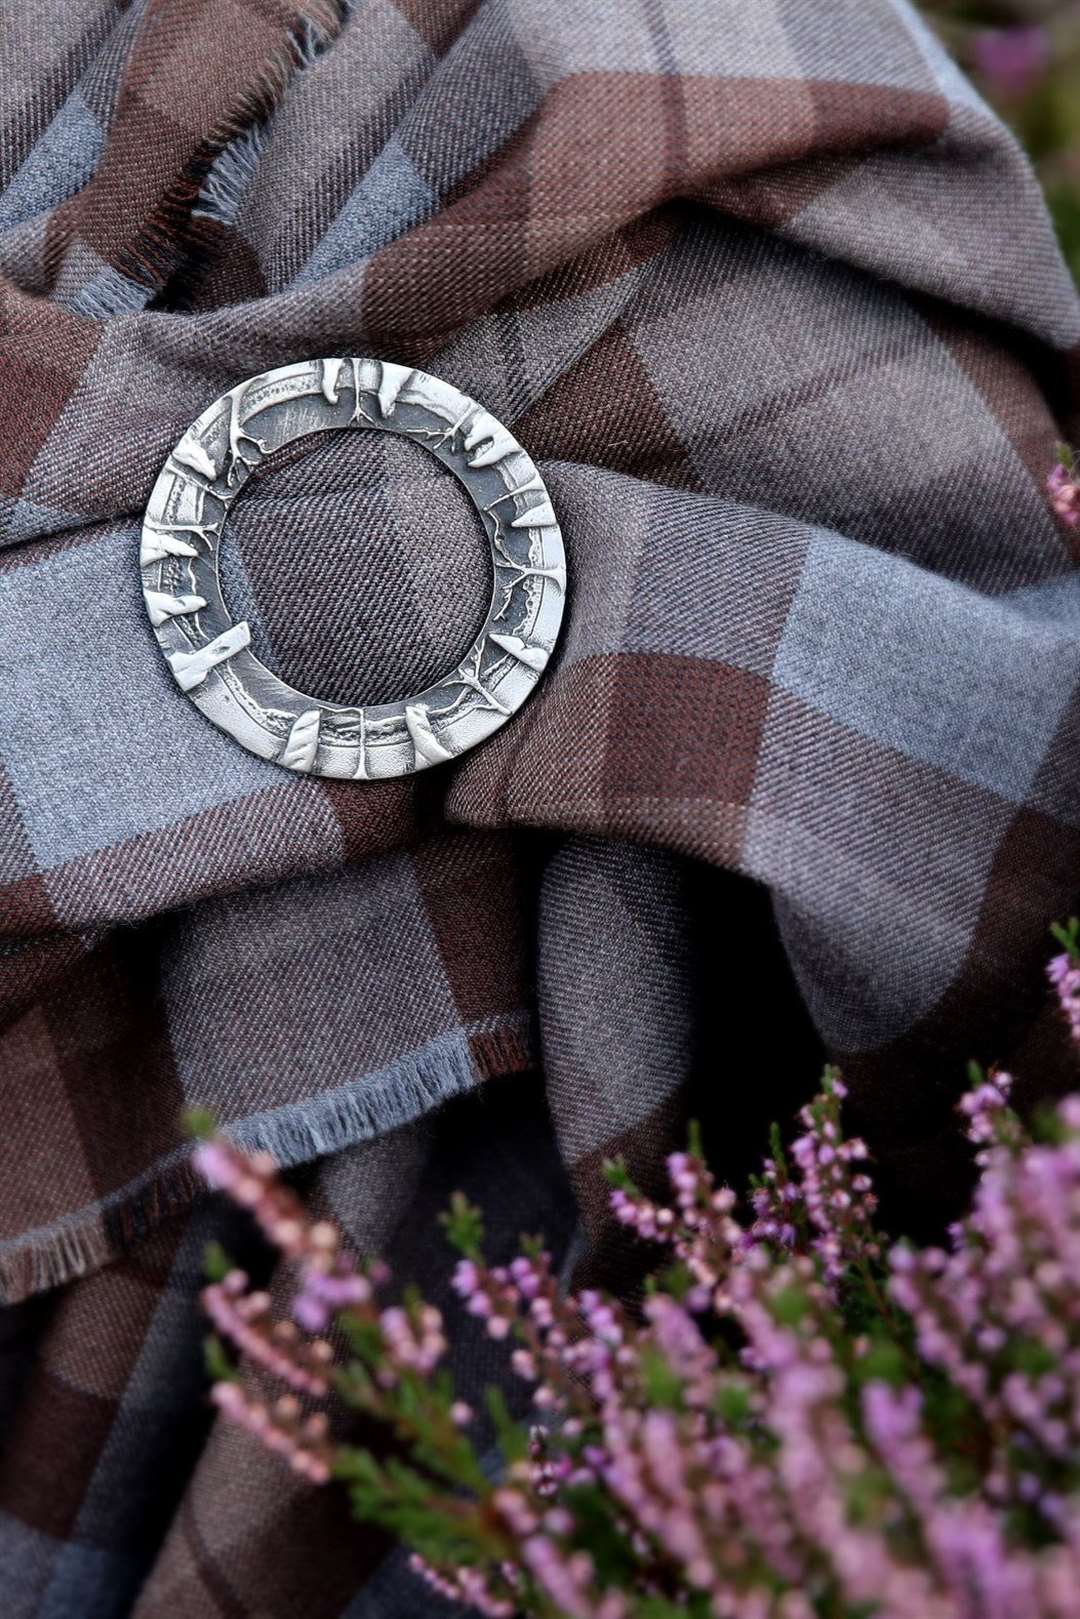 Aurora Jewellery based at St Ola on Orkney is making the jewellery.